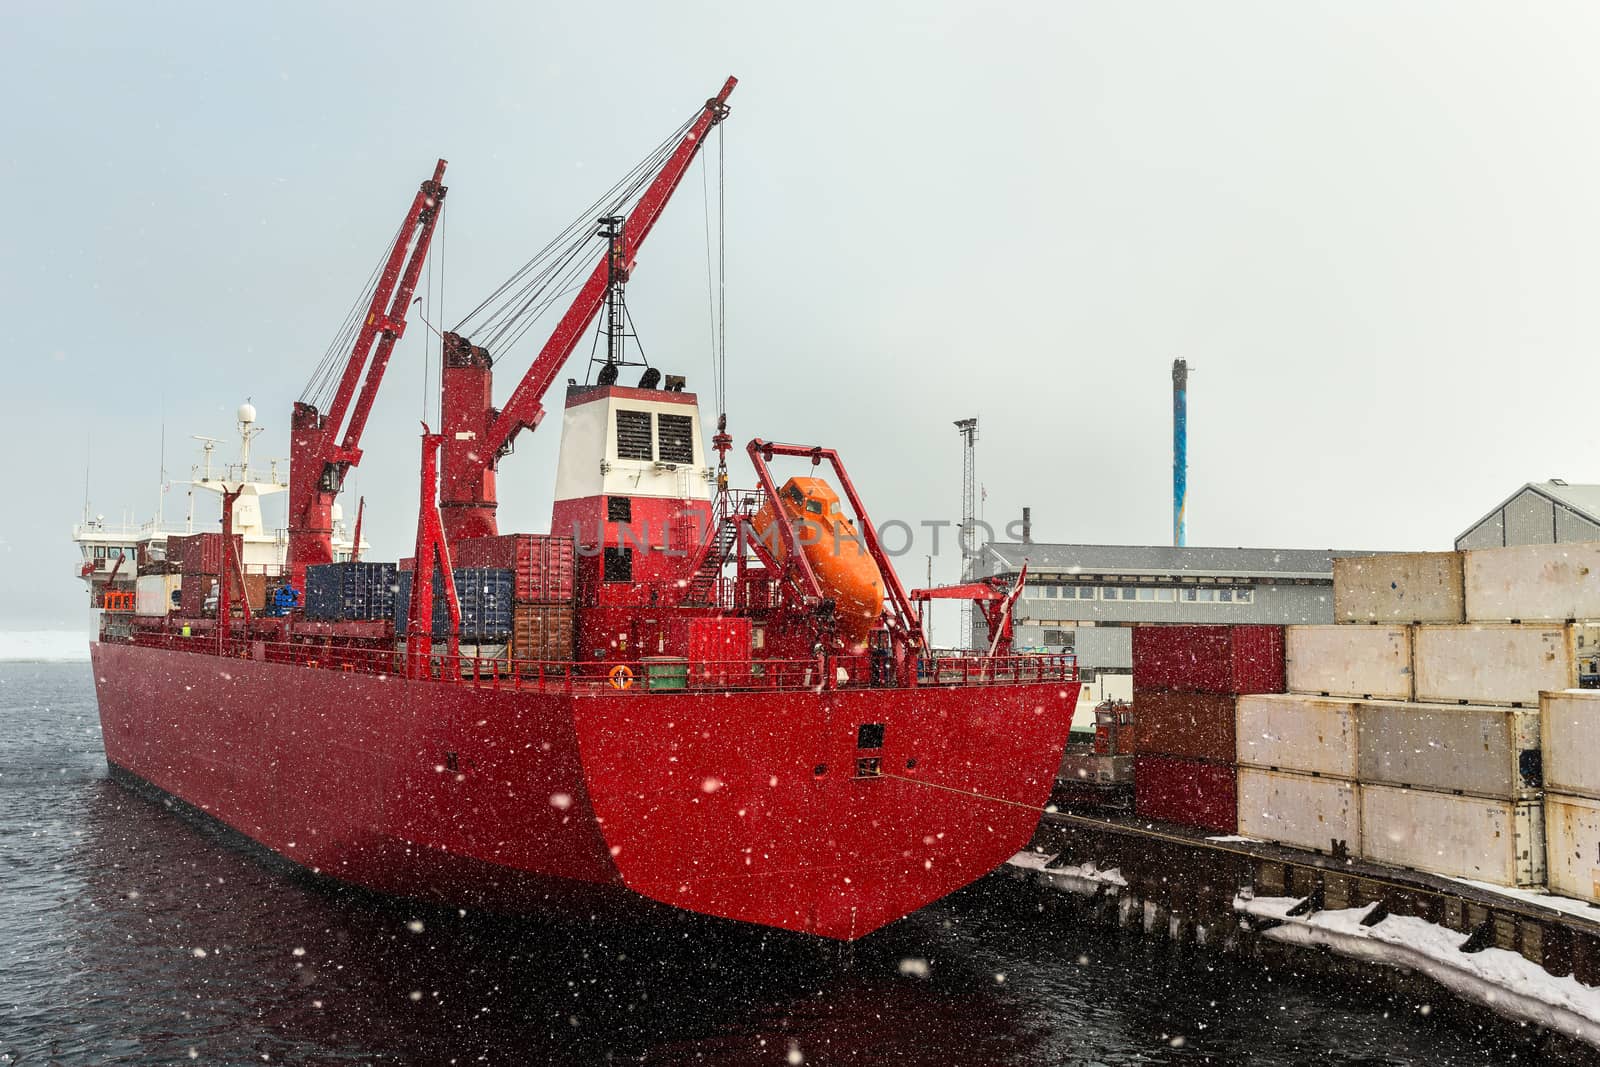 Big red cargo ship under the heavy snowfall in the port of Aasiaat, Greenland